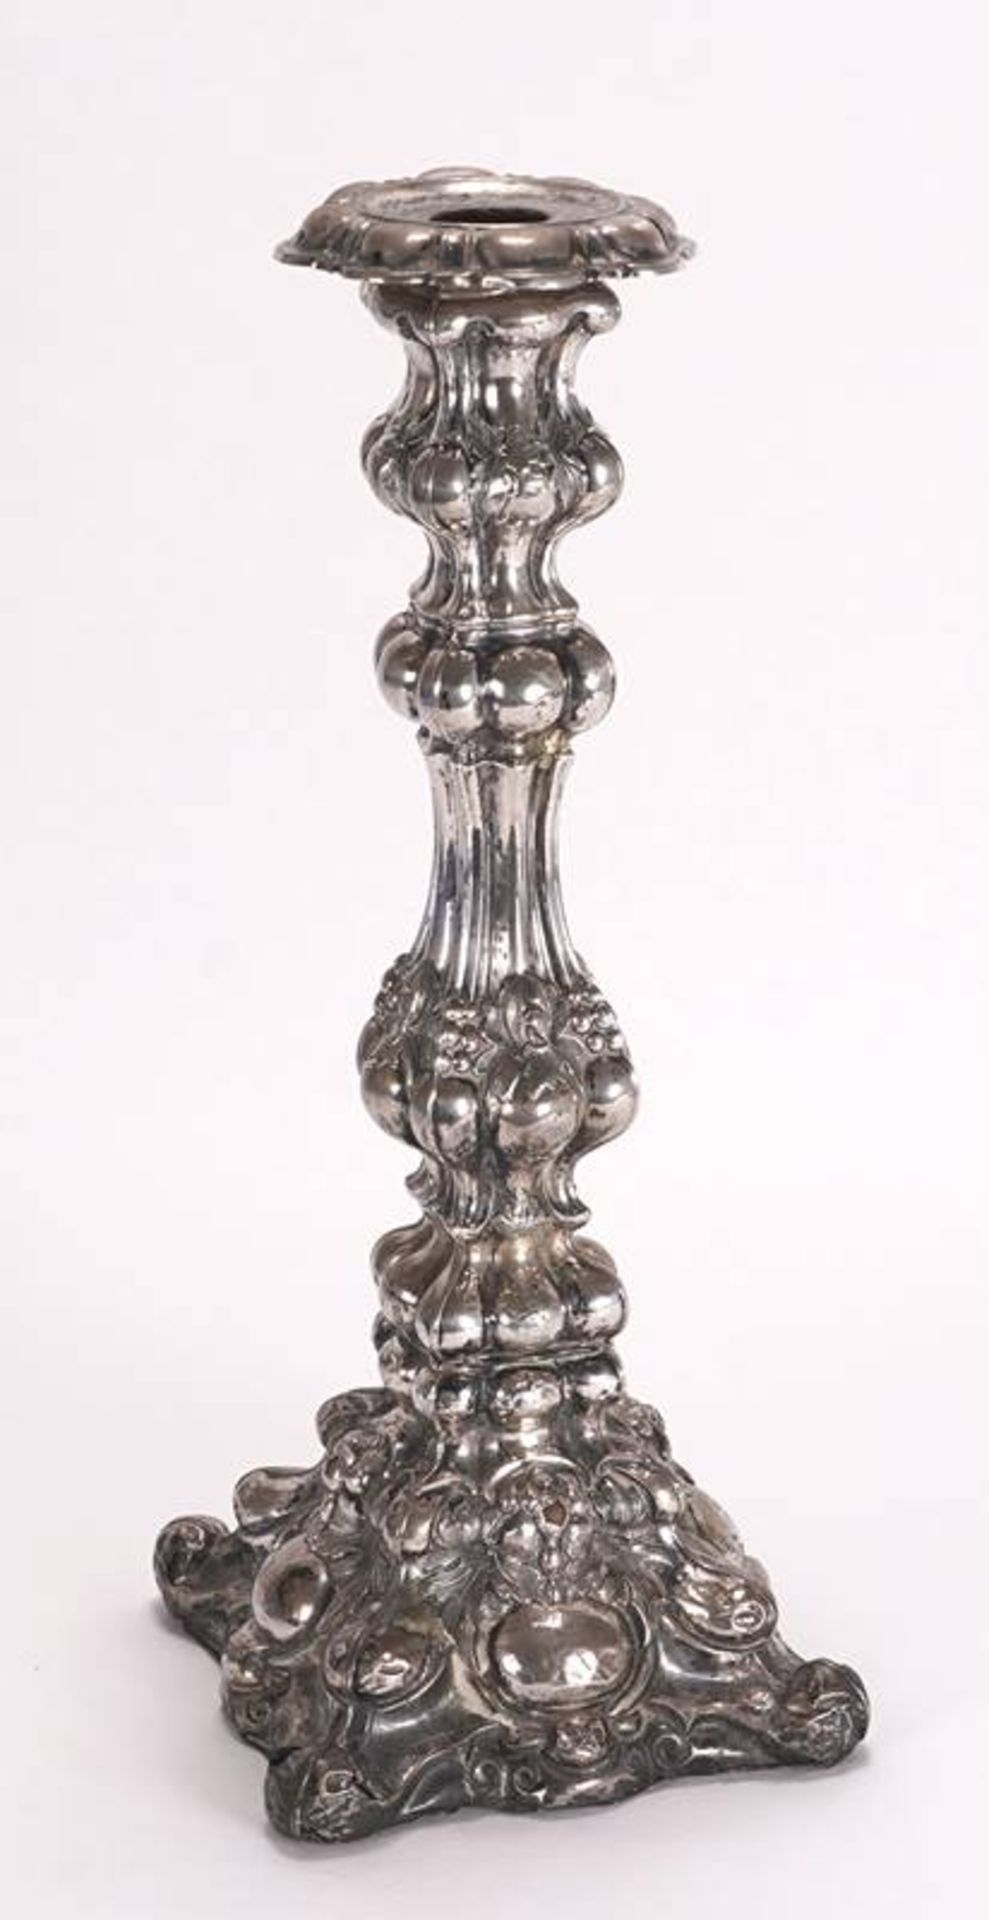 Candlestick - Image 2 of 4